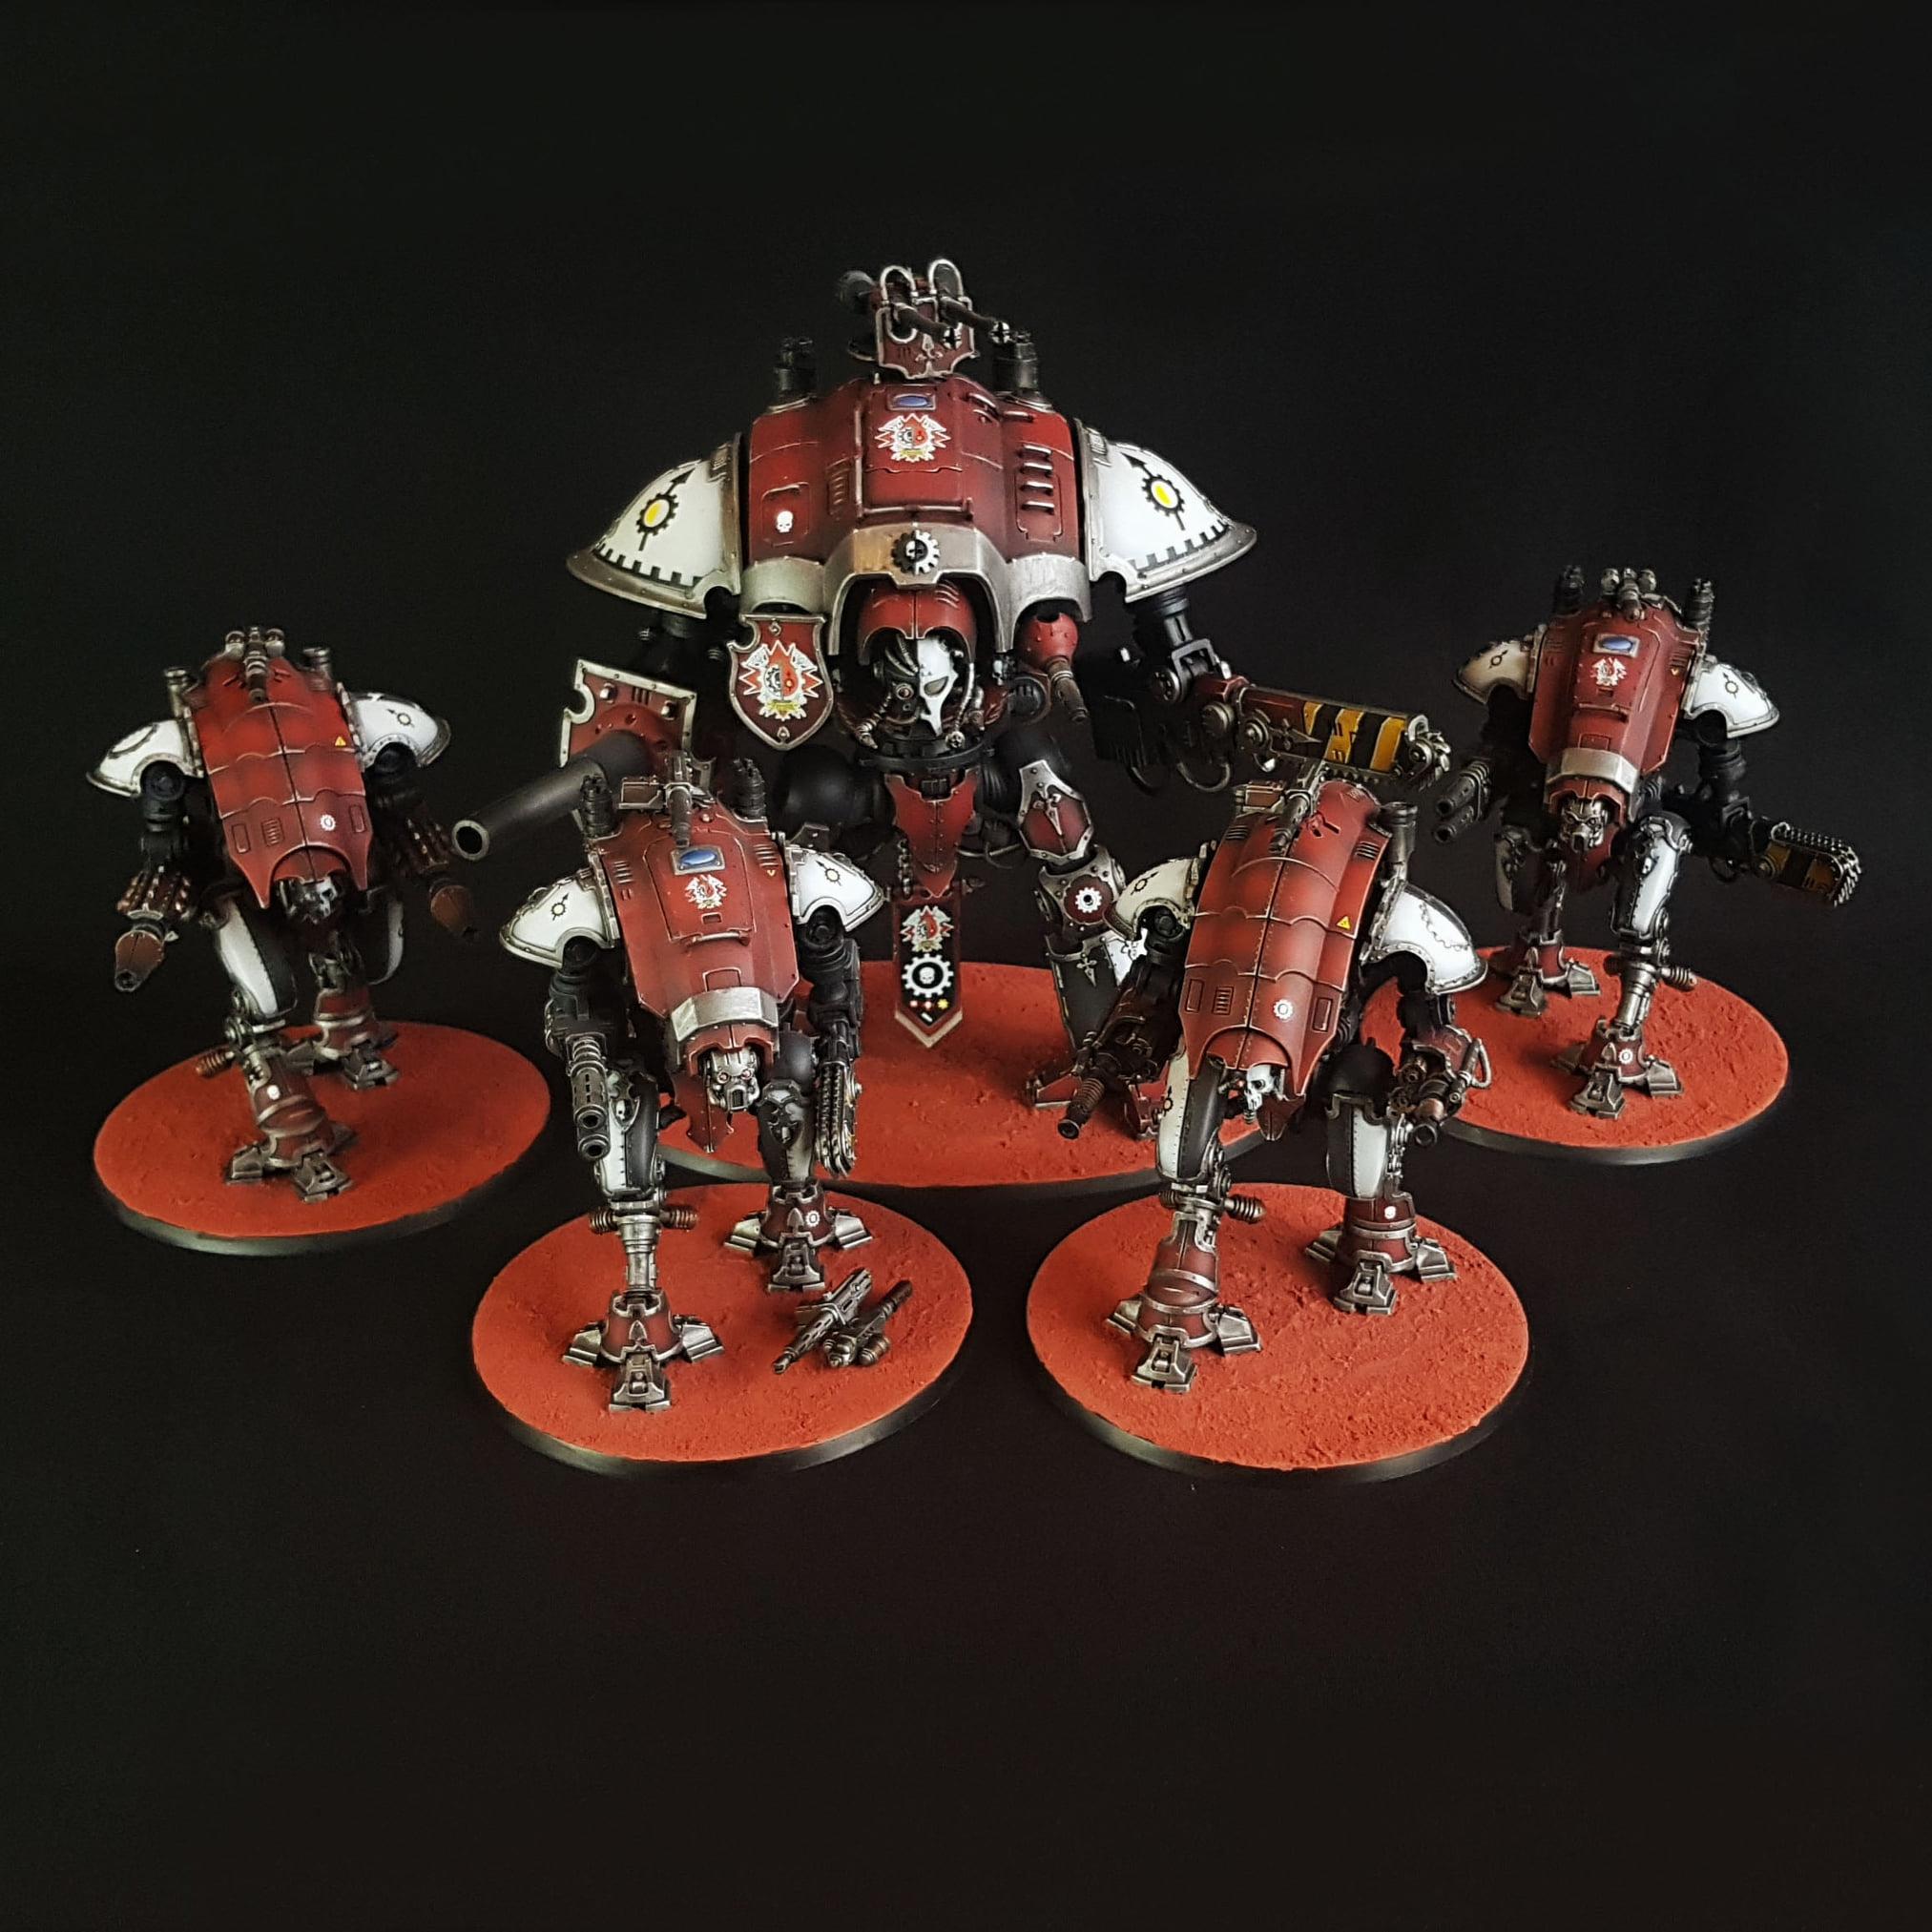 Armiger, House Taranis, Household, Imperial Knights, Magnetised, Moirax, Warglaive, Warhammer 40,000